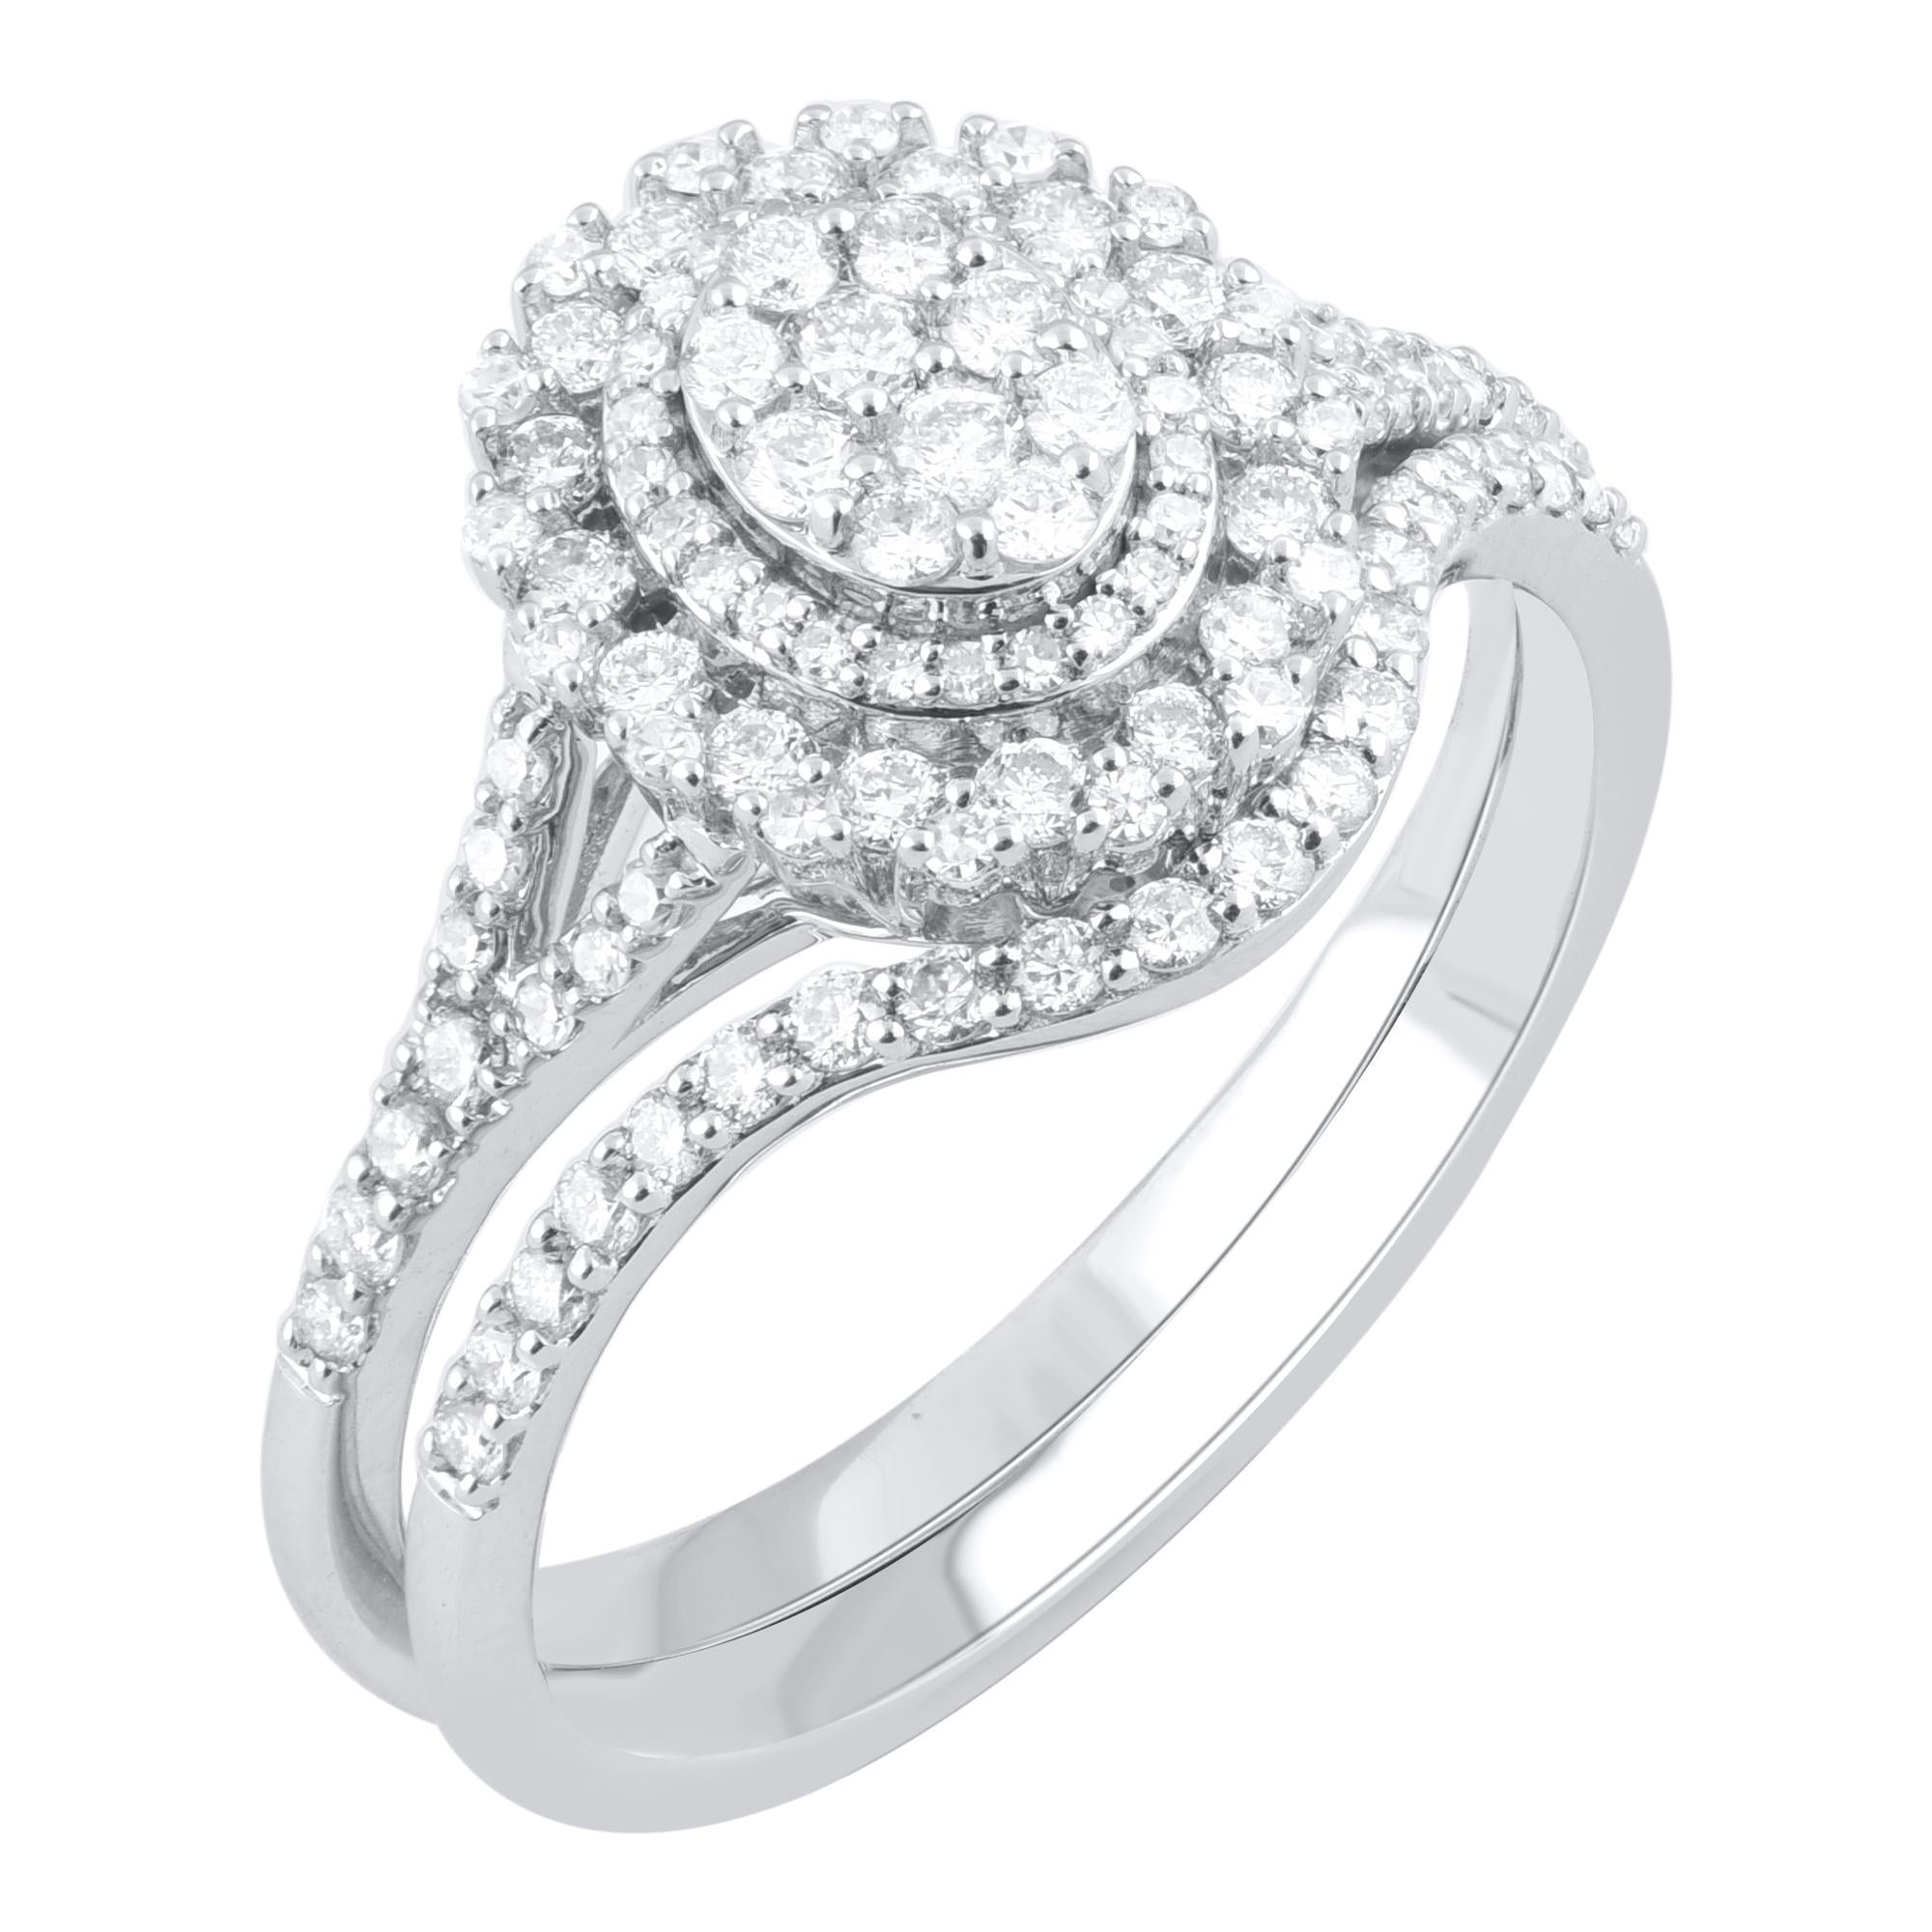 Make that special moment magical with the exquisite diamond bridal ring set. This classic engagement ring is studded with single cut & brilliant cut 107 diamond in prong setting. This ring is designed in 18-karat white gold. The total diamond weight